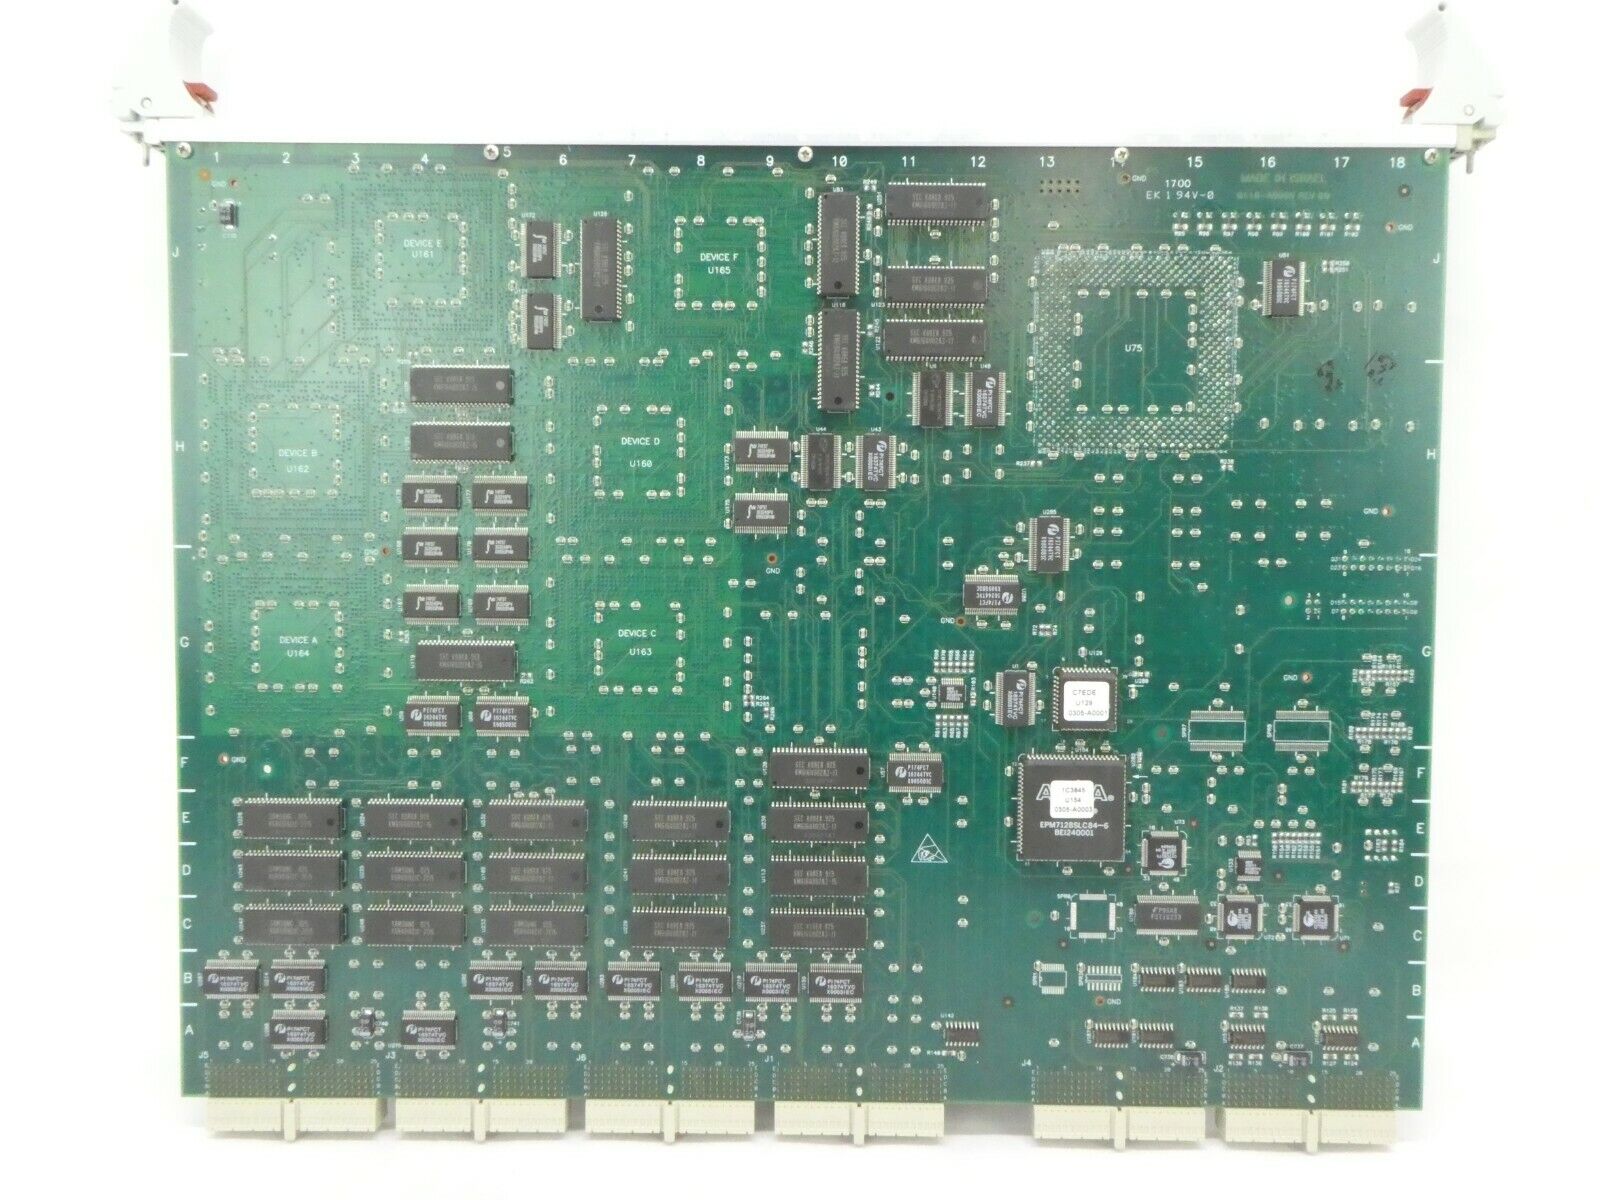 AMAT Applied Materials 0100-A0009 ASAP Board PCB Card 200mm Excite Working Spare